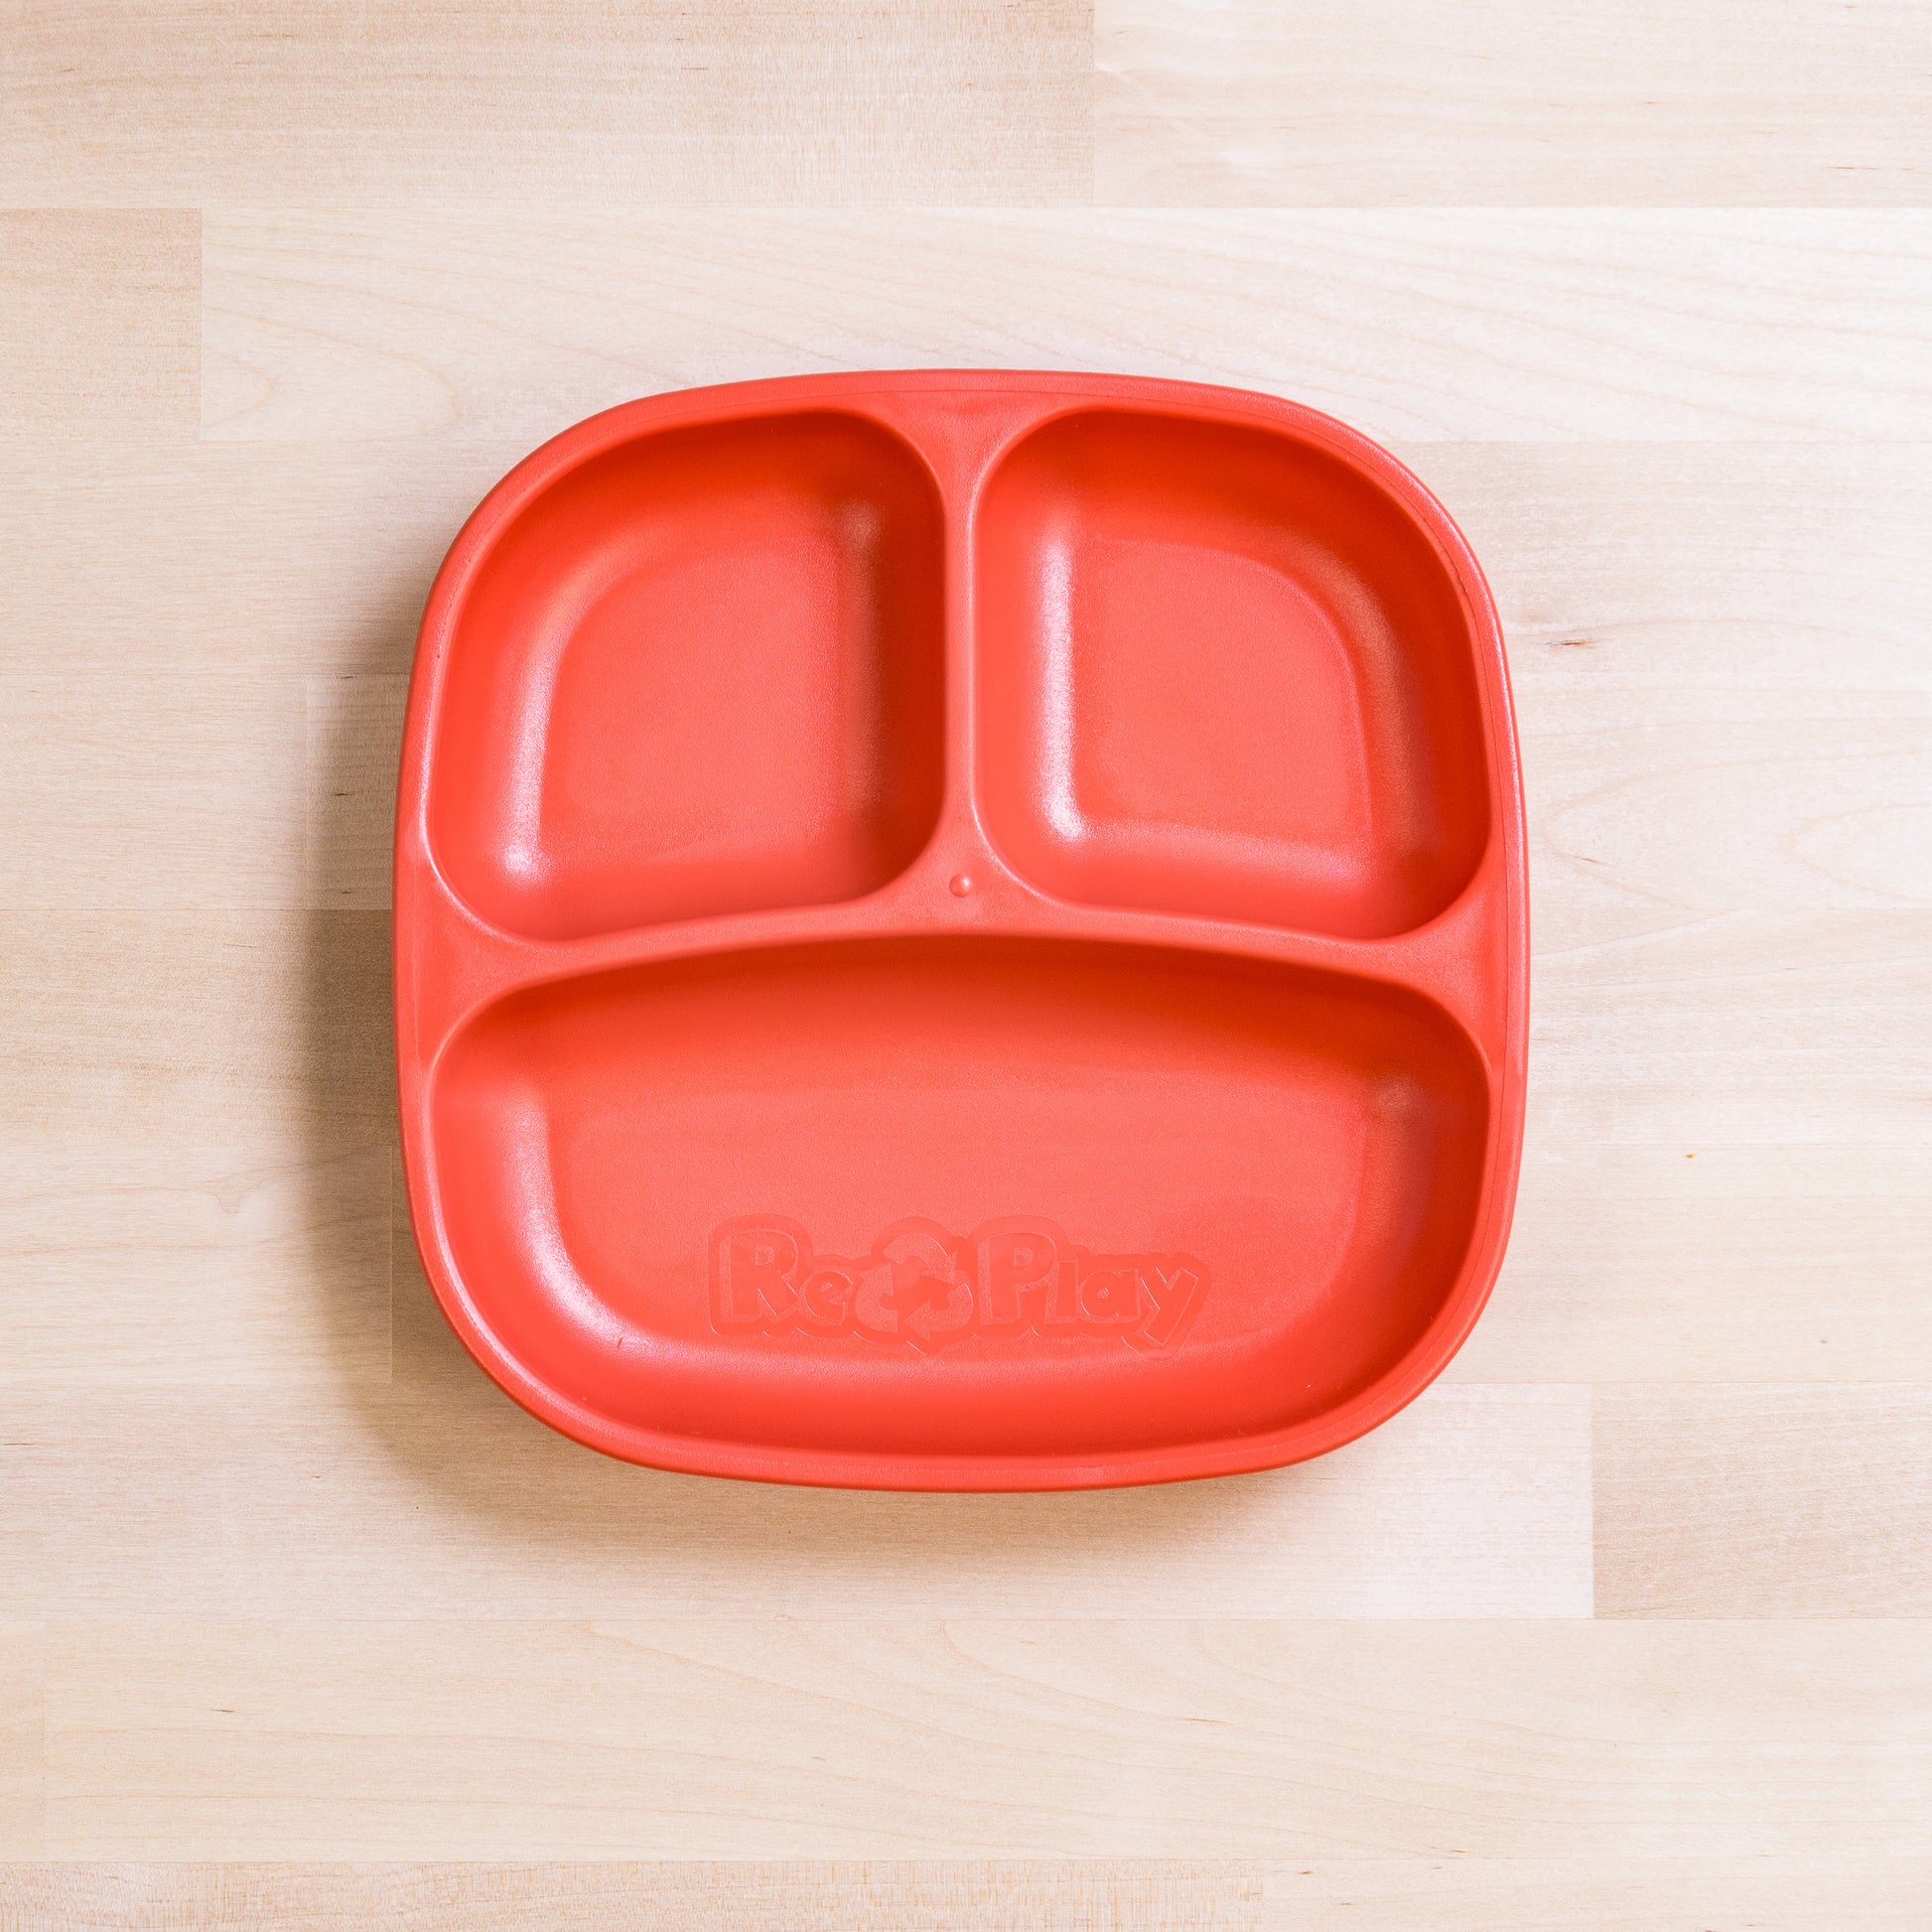 Re-Play Divided Plate 7" plate in Red from Bear & Moo